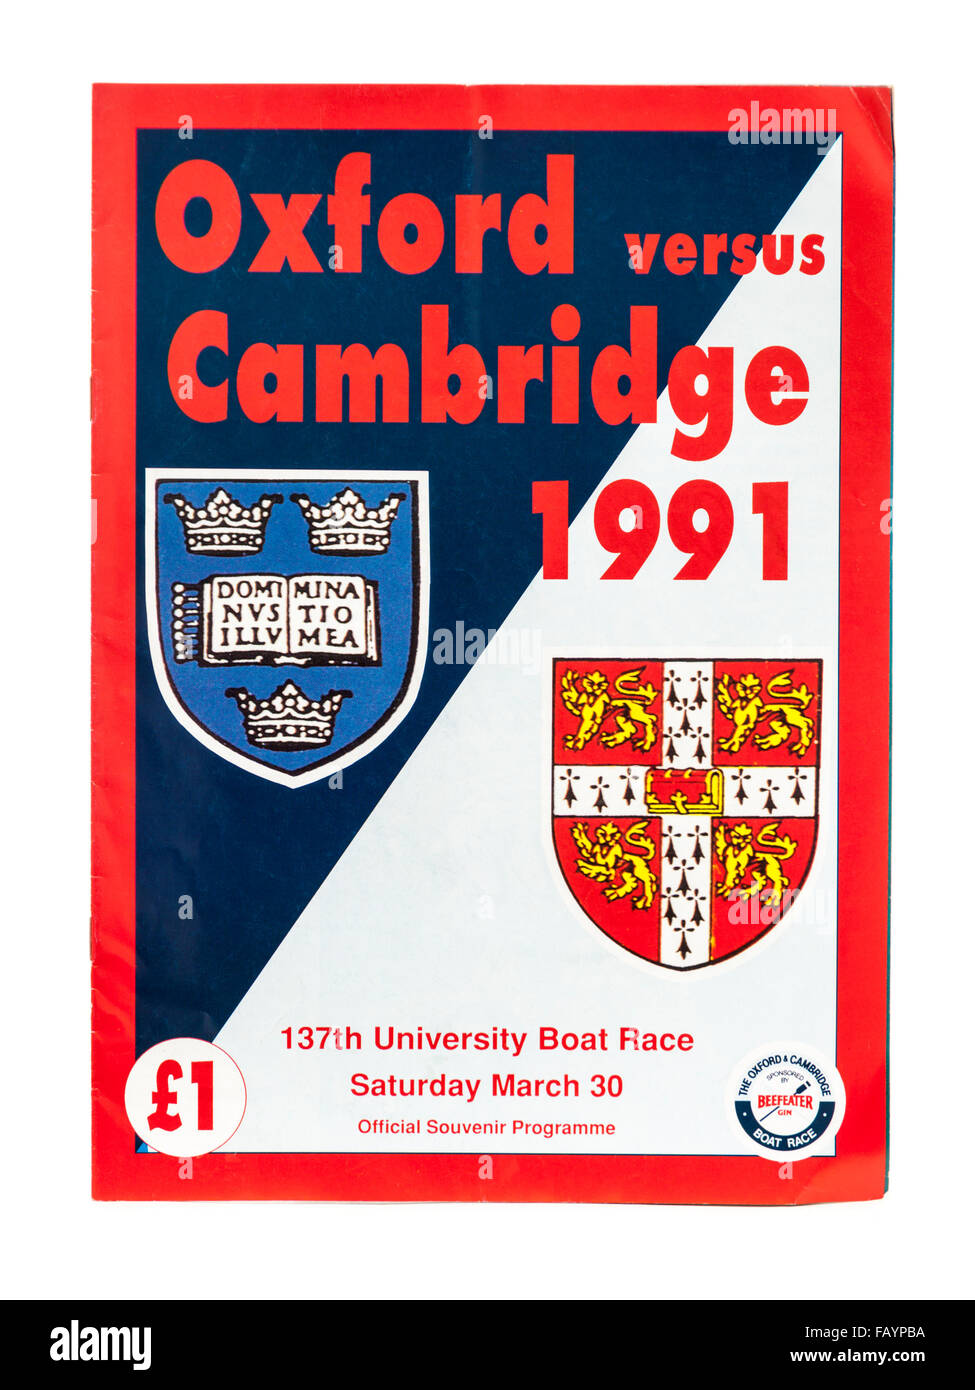 Official Souvenir Programme of the 137th University Boat Race between Oxford and Cambridge on 30th March 1991 (won by Oxford) Stock Photo